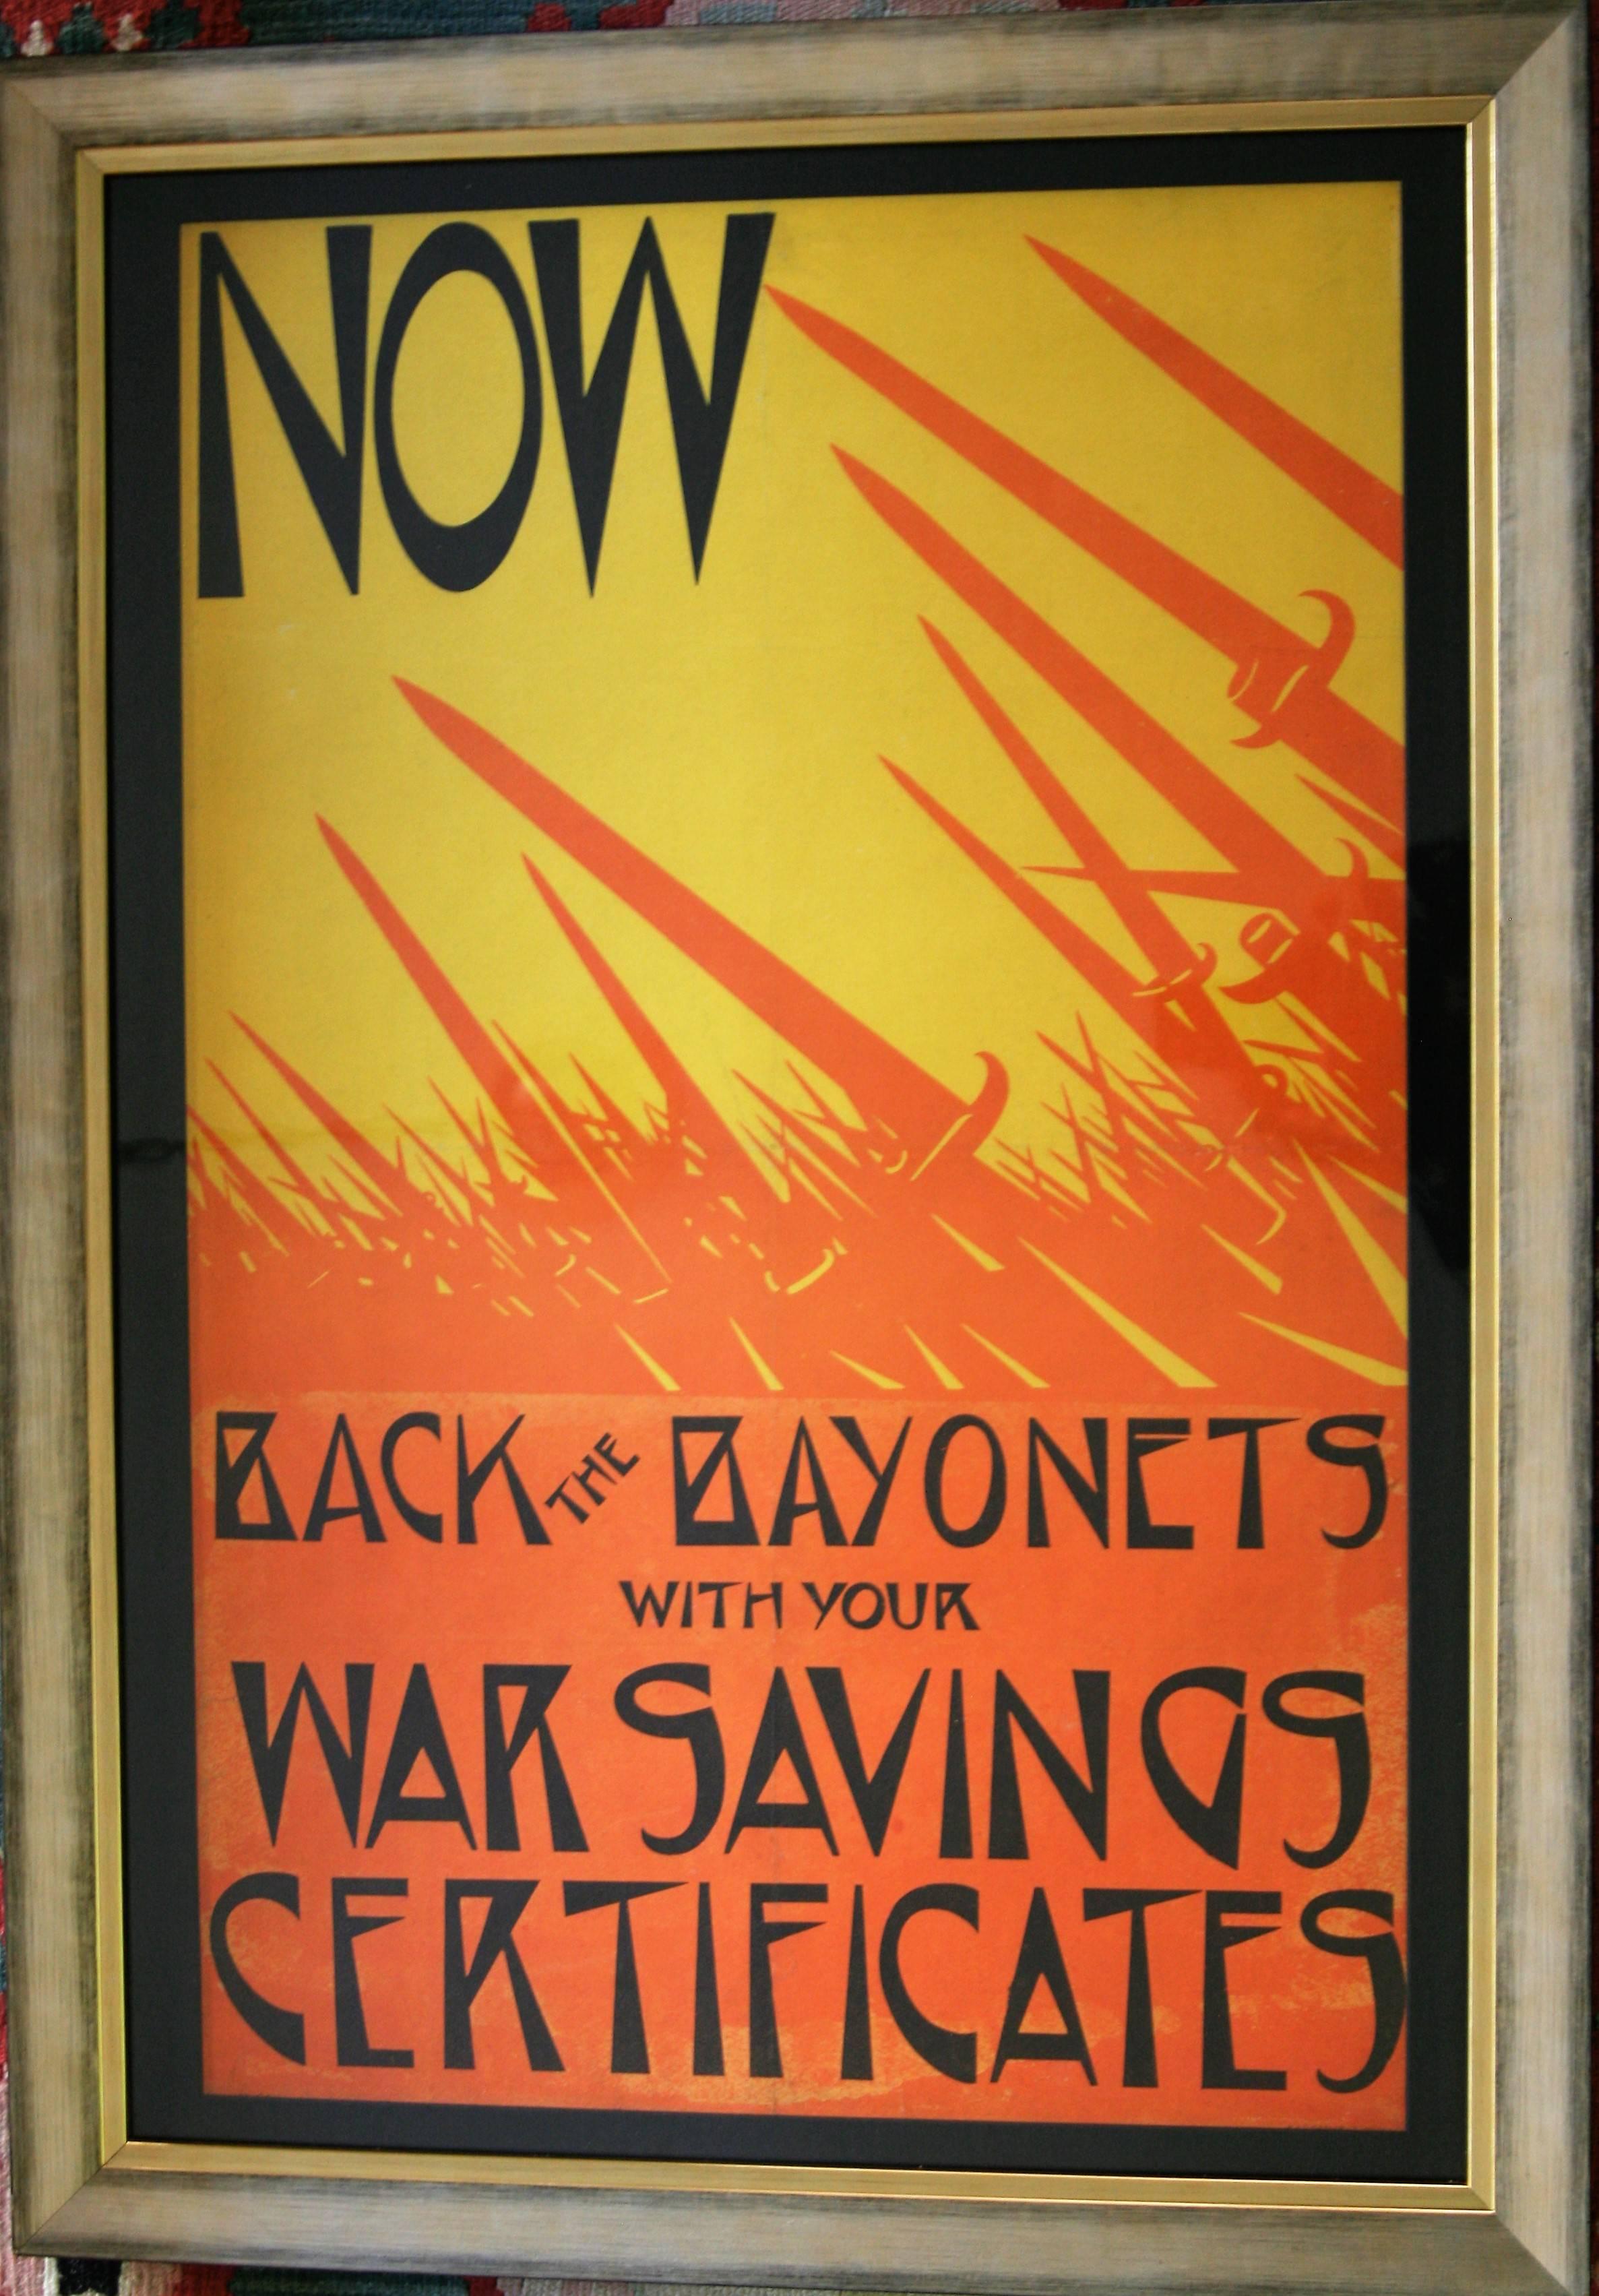 Now Back the Bayonets - Print by Christopher R. W. Nevinson